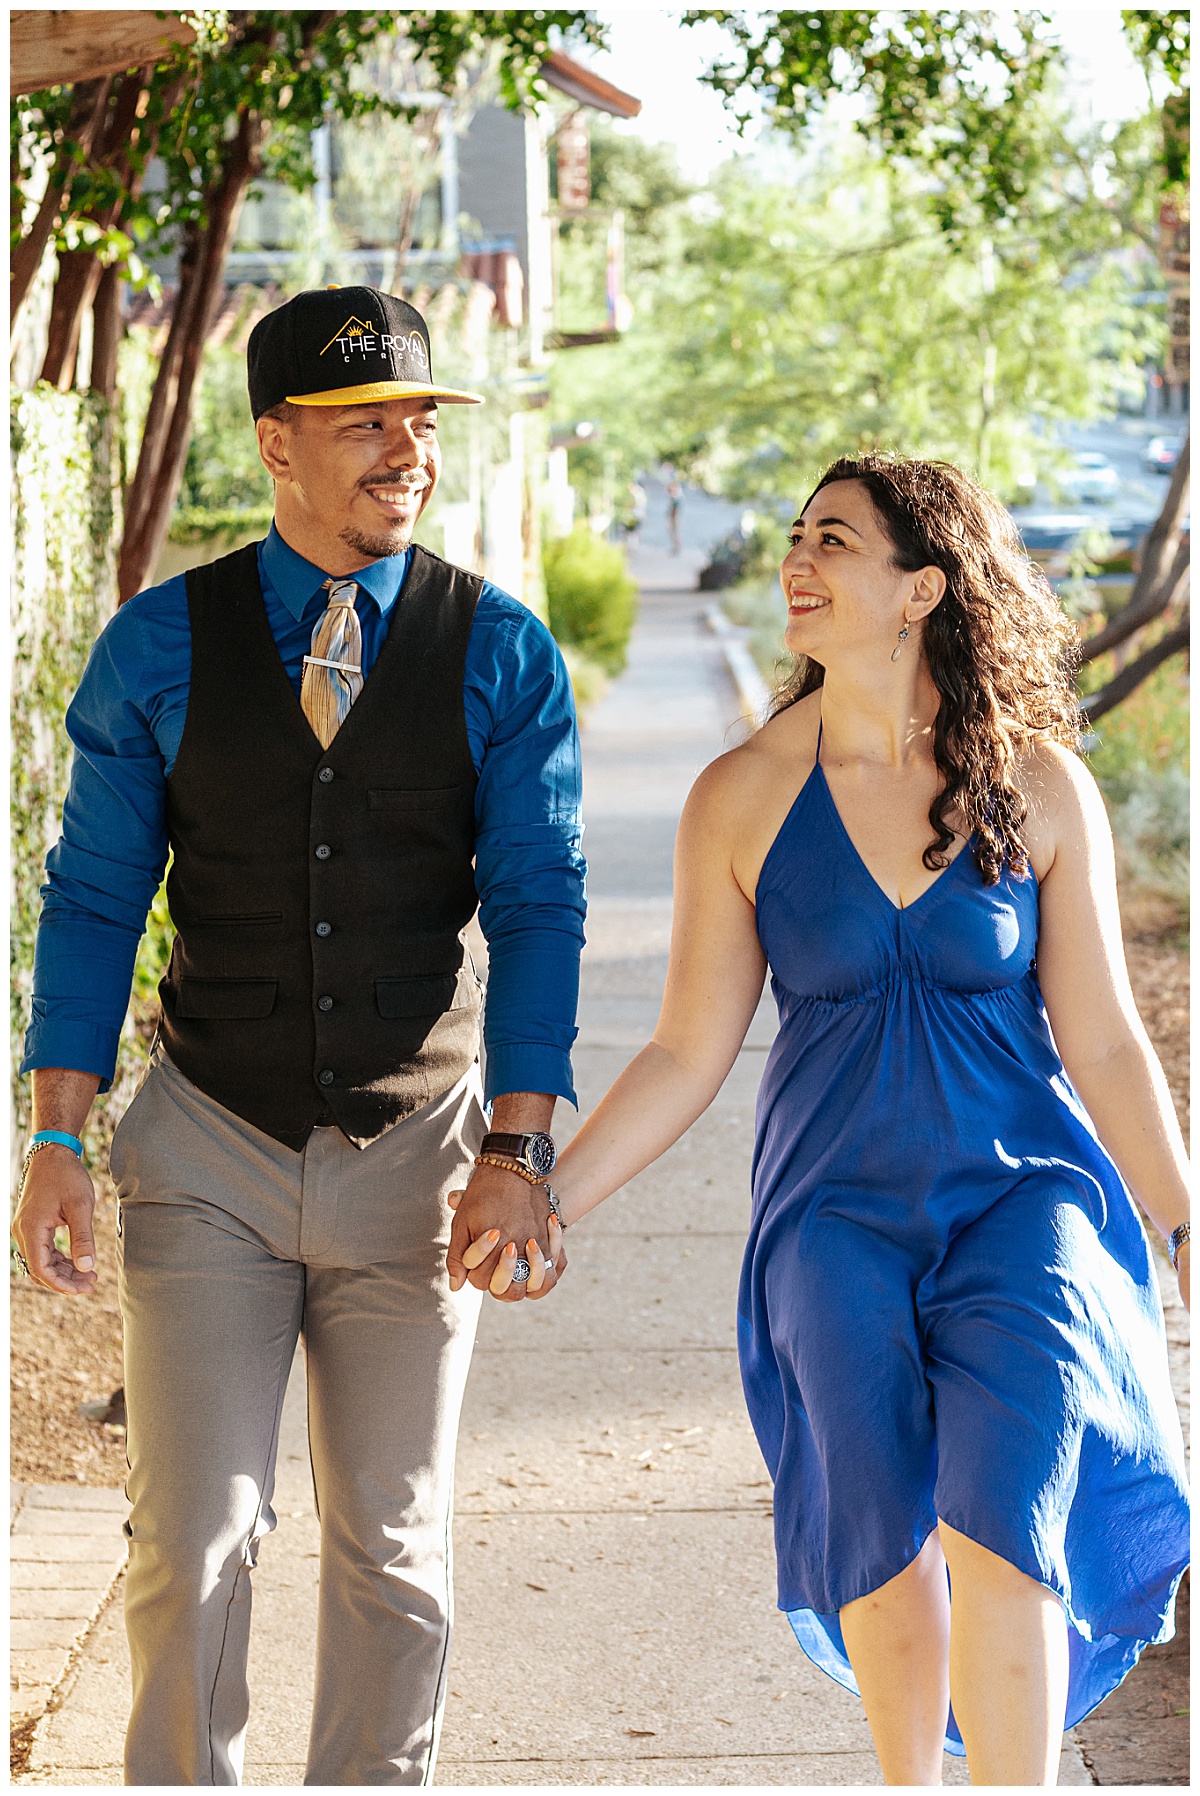 man and woman walk down sidewalk holding hands and smiling by Ellie Chavez Photography